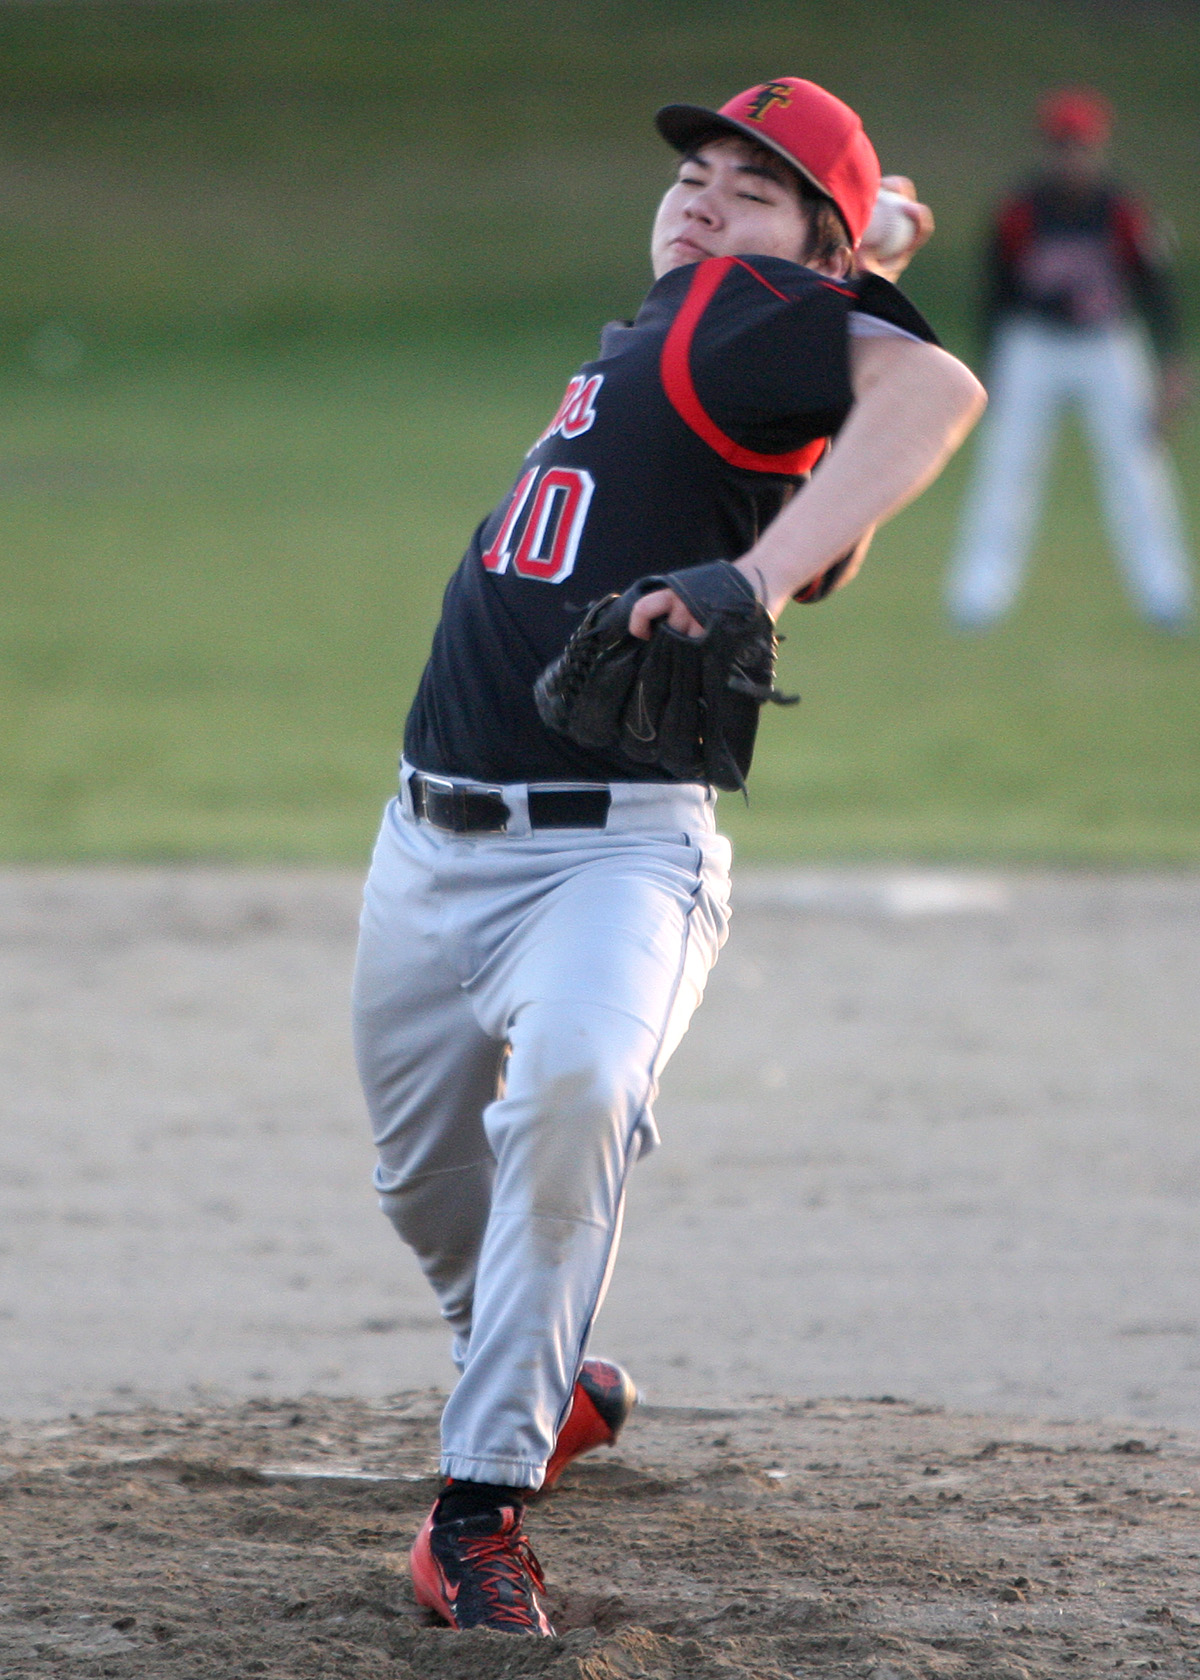 Nolan Park of Tyee sends his pitch to the plate.